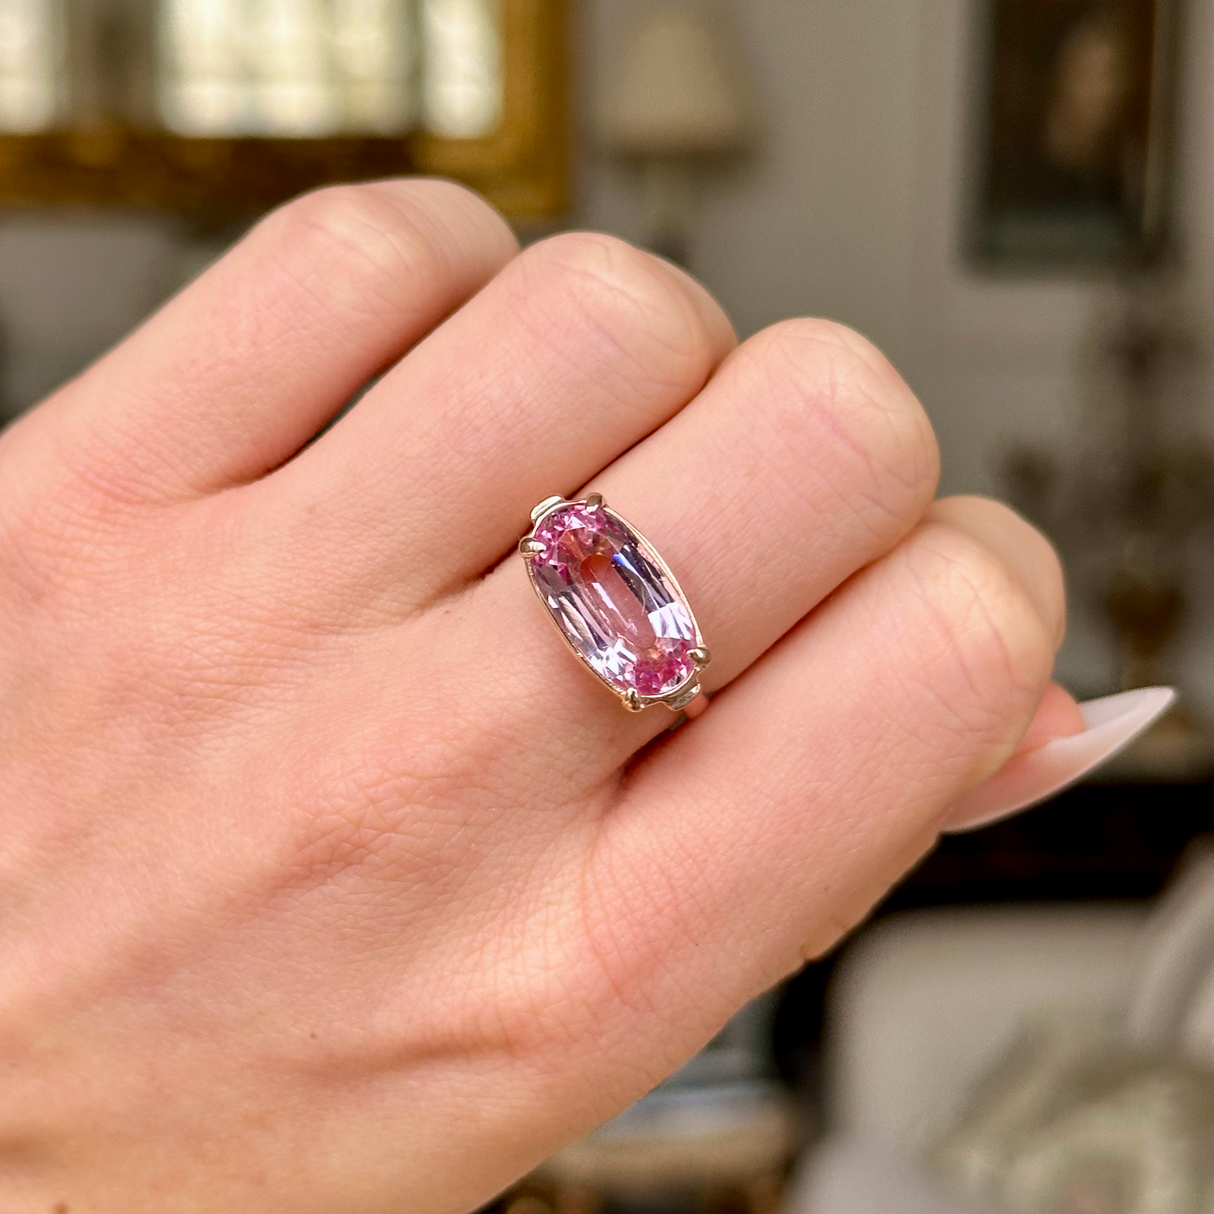 Vintage, 1940s Pale Pink Topaz Ring, worn on closed hand.